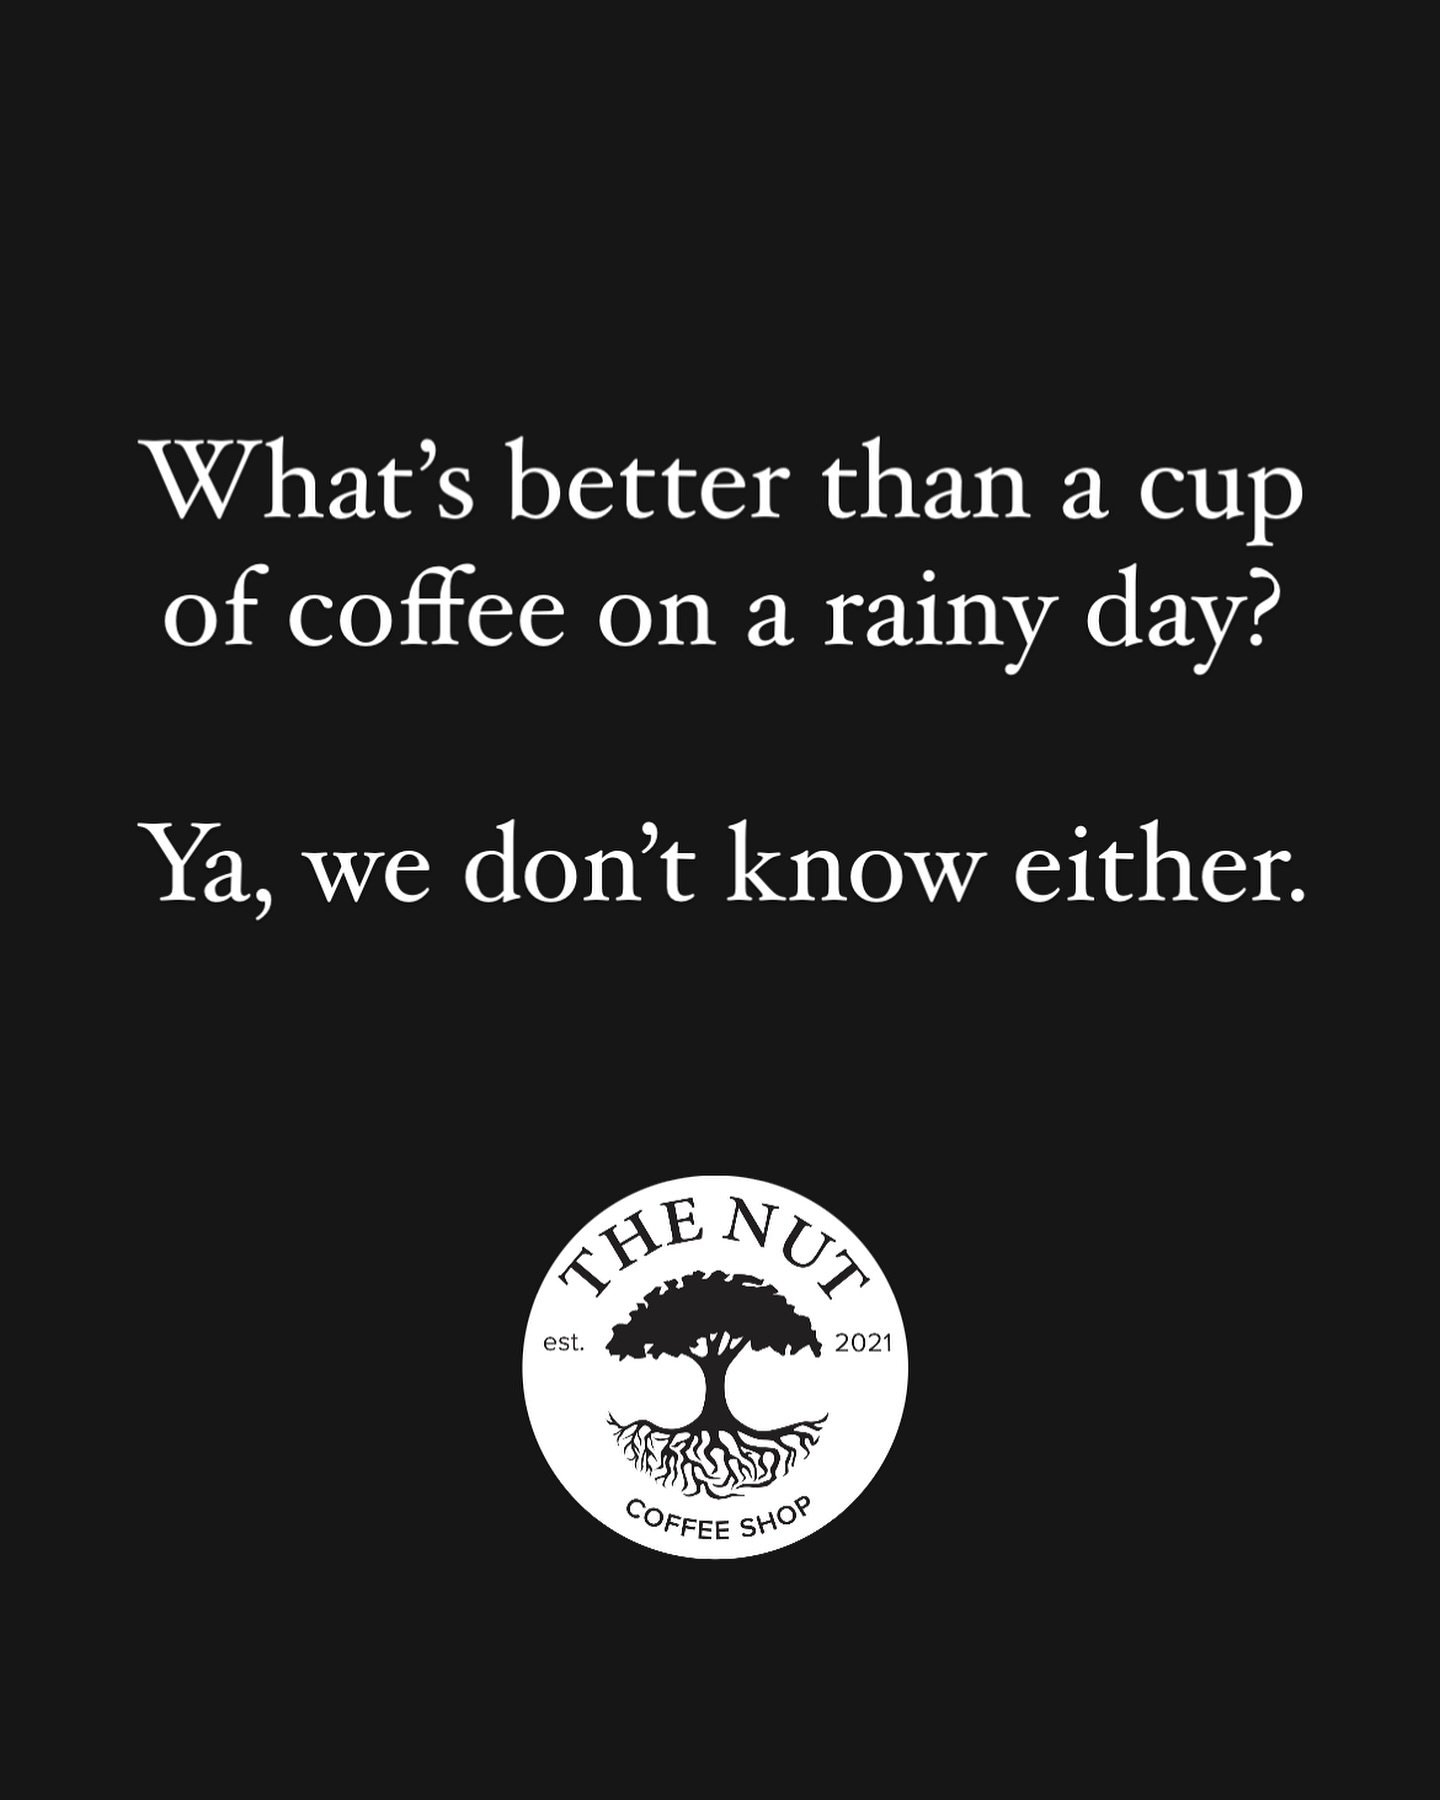 Open all day for your rainy day coffee needs. 
8am-5pm 
See you at The Nut. 

#thenutca #mapleridge #mapleridgebc #mapleridgebusiness #raincouver #rainyday #rainydaycoffee #coffeeshop #bc #bcbusiness #yvr #vancity